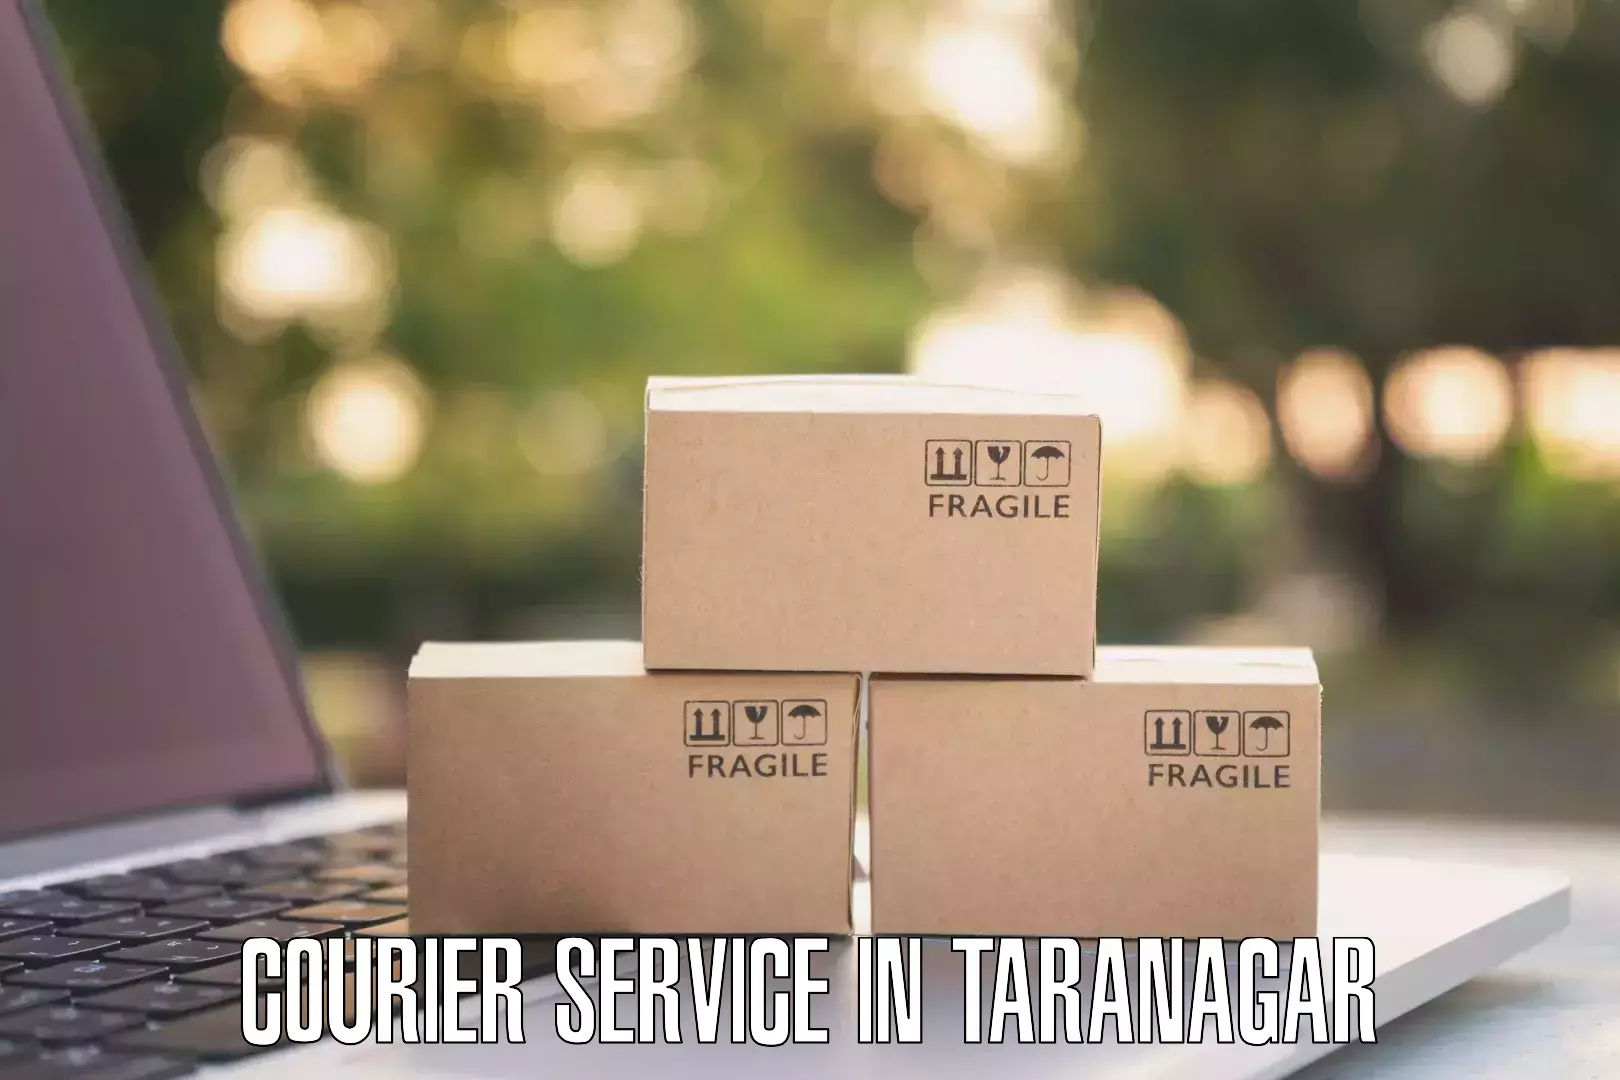 Express package delivery in Taranagar